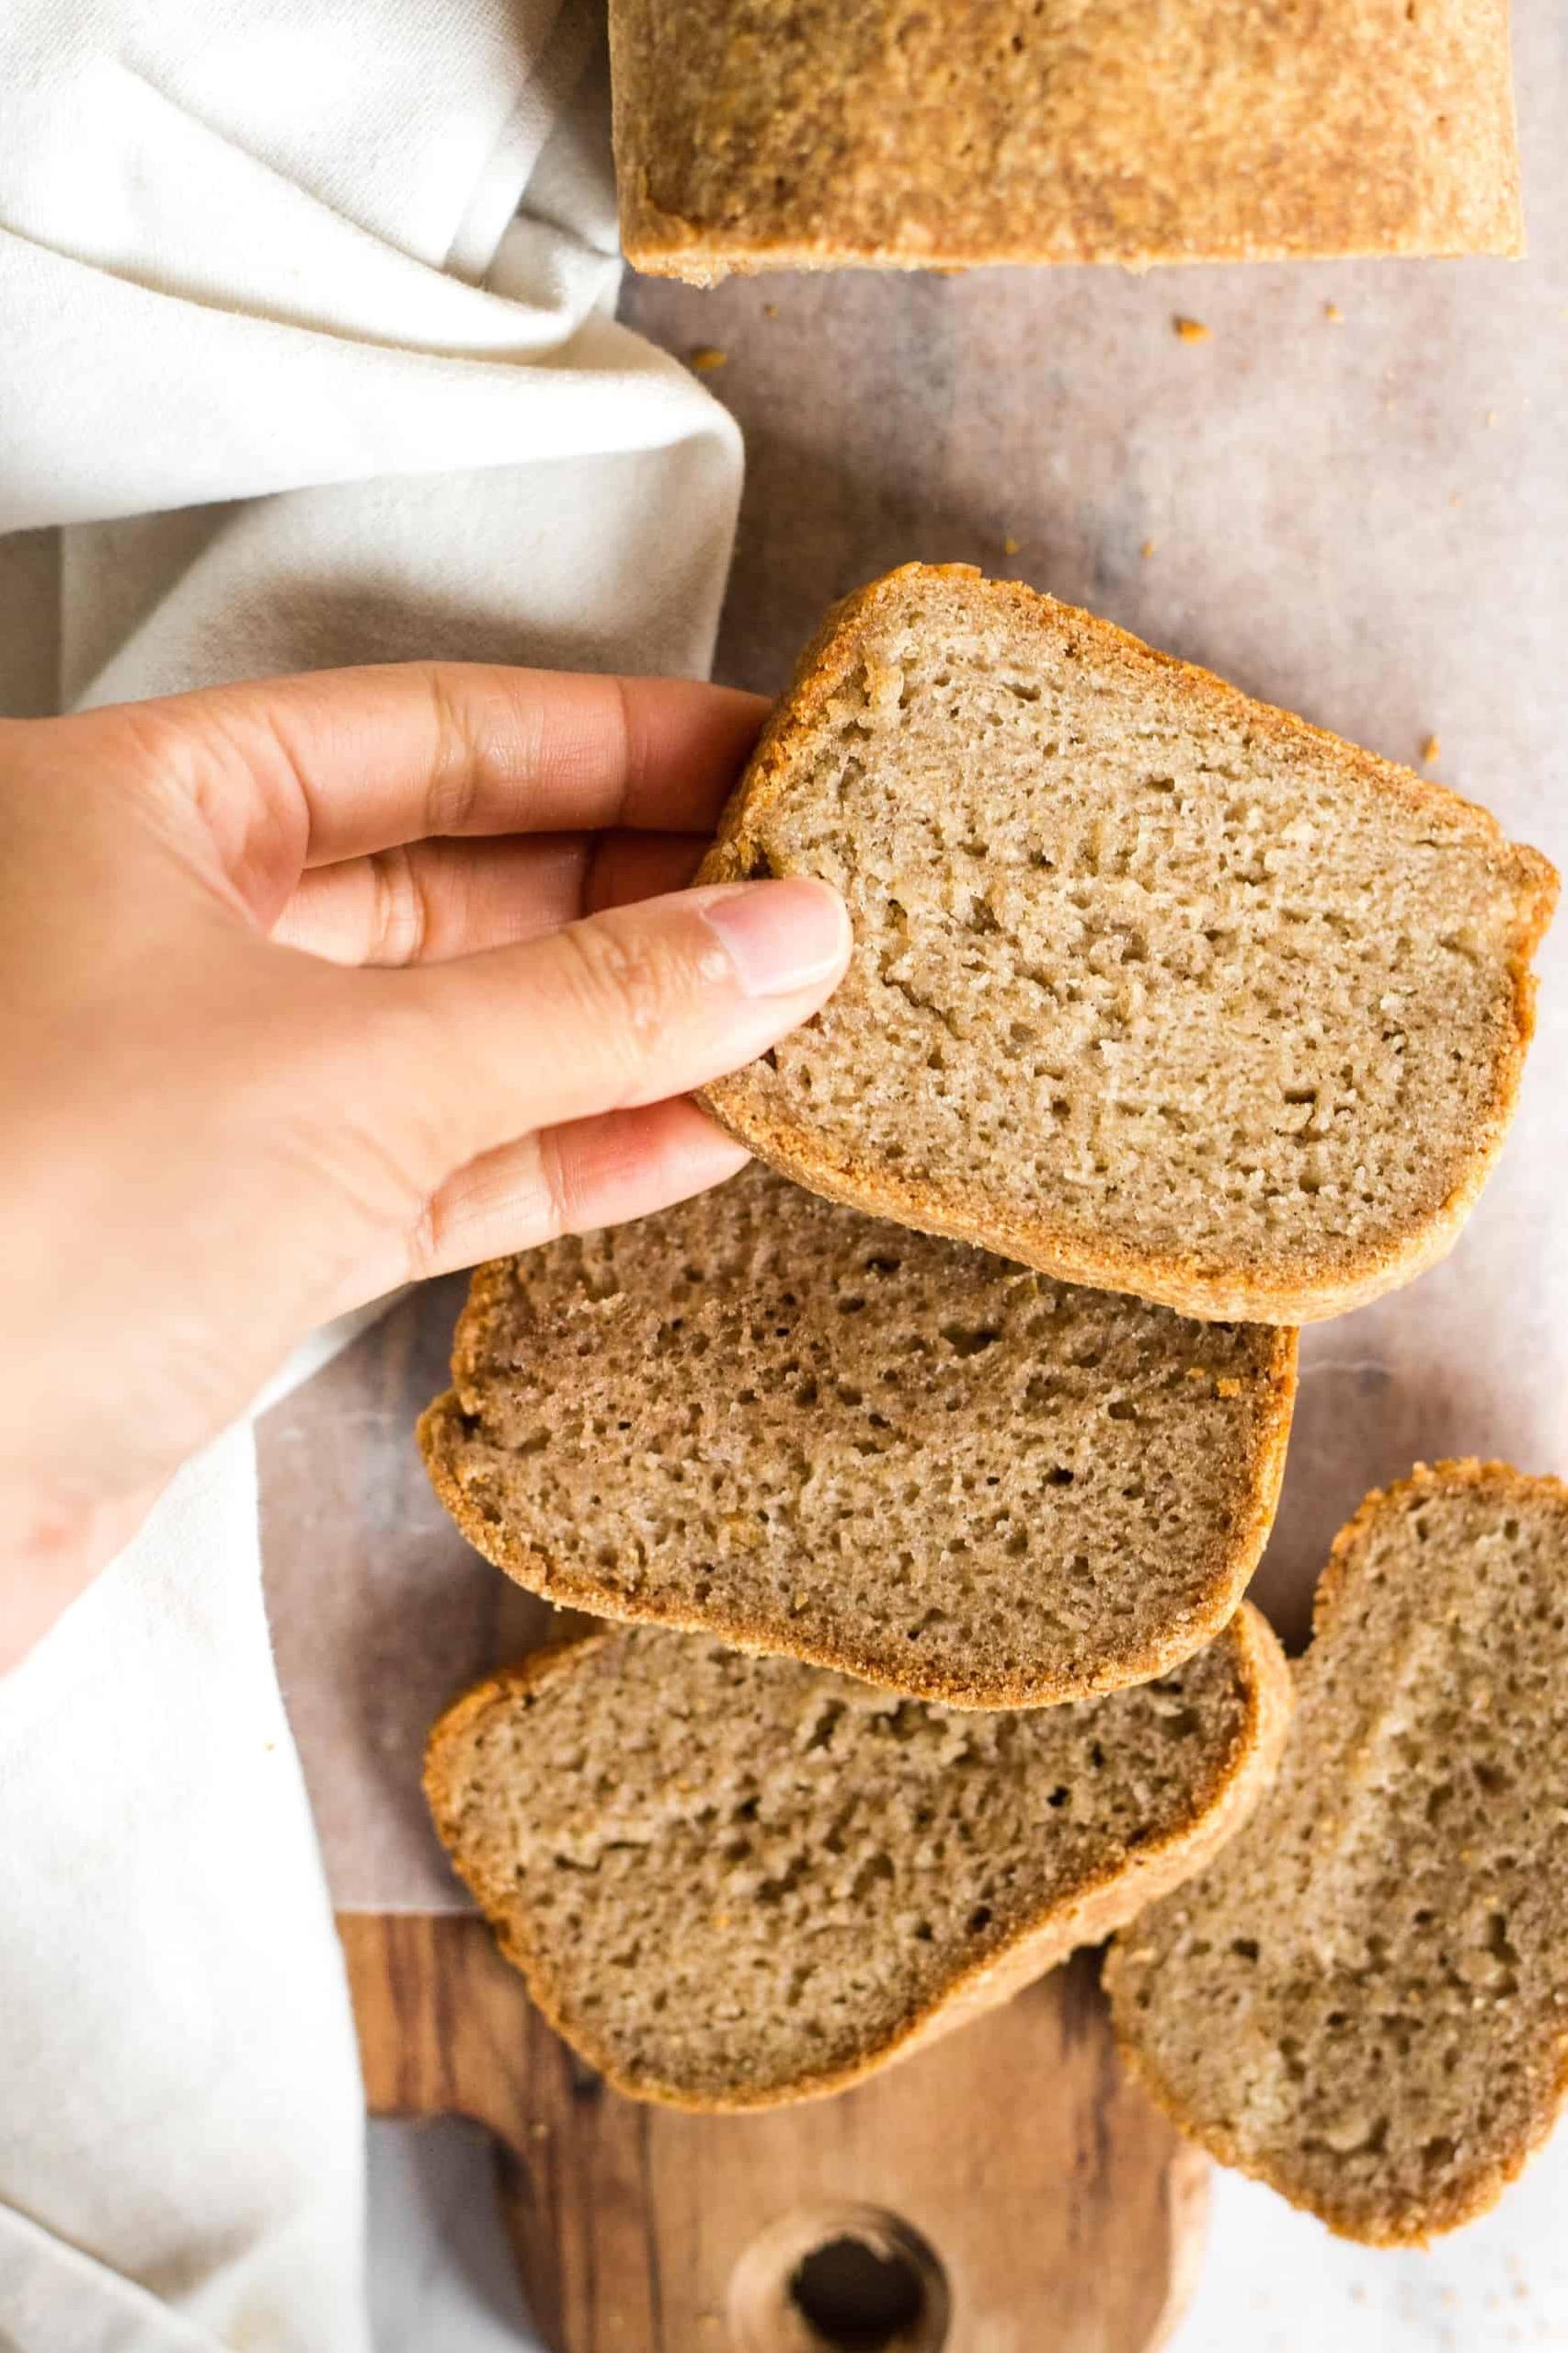  Slice this fresh homemade bread and serve it with your favorite spread for a tasty breakfast